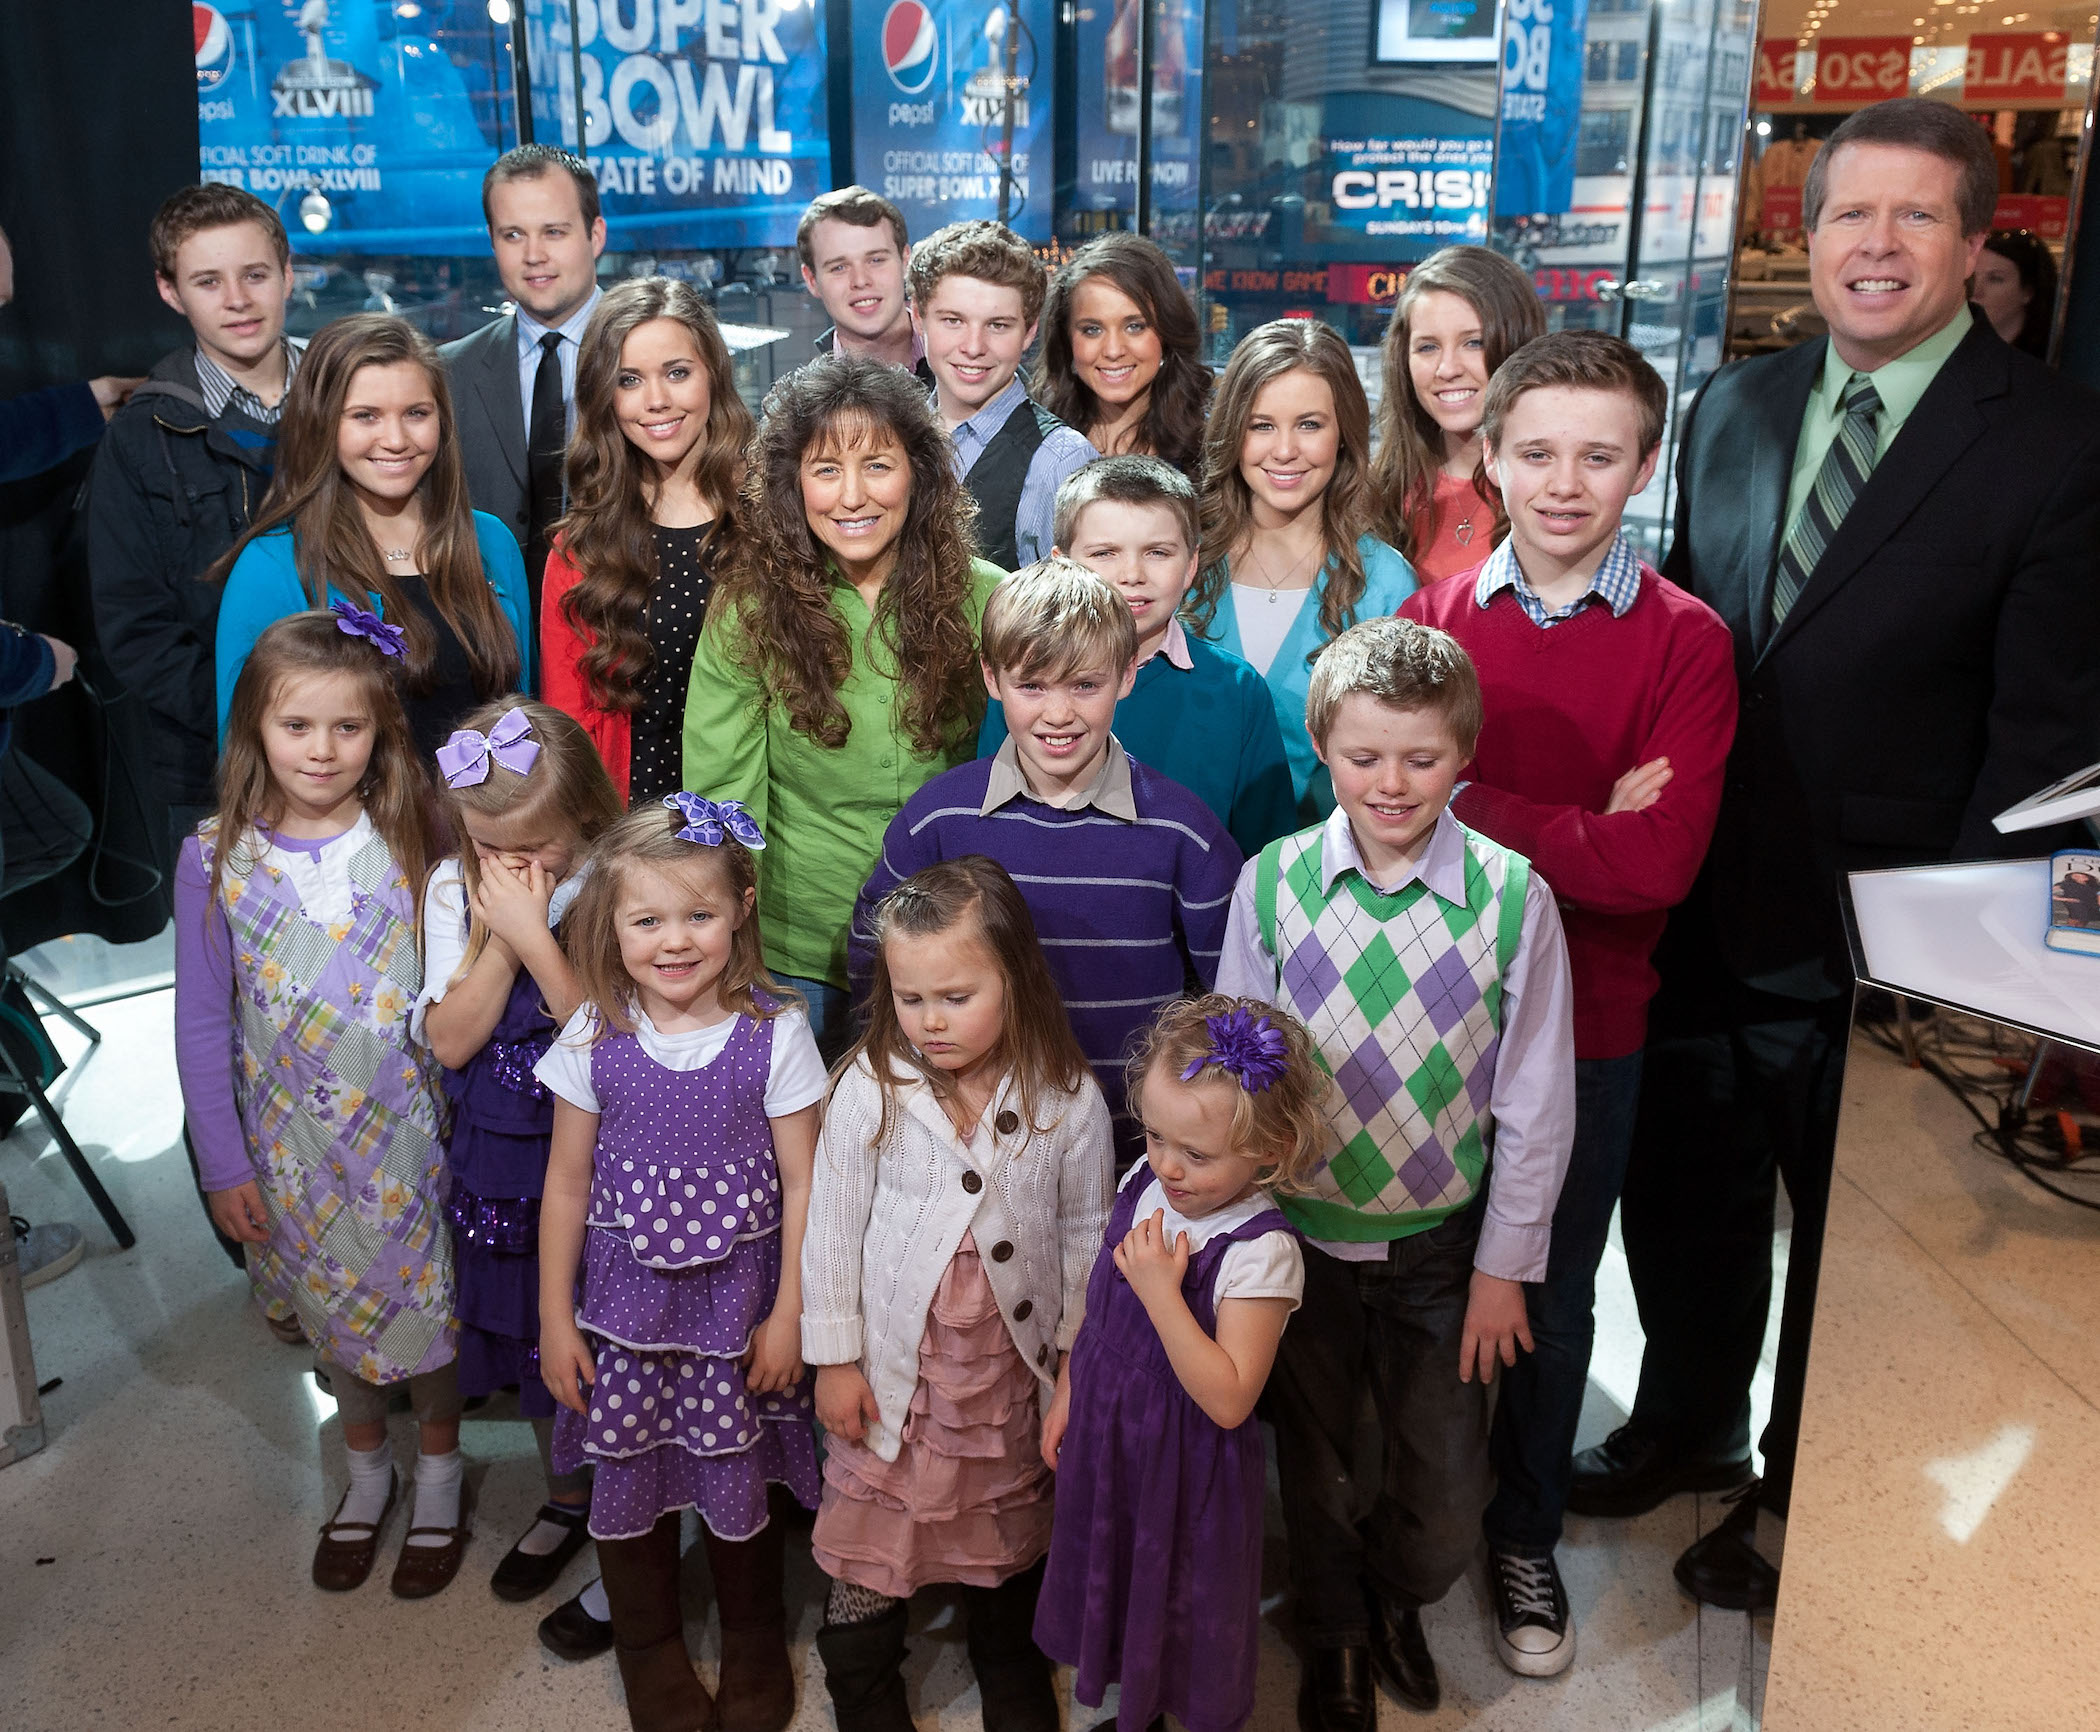 The Duggar family crowded together on stage smiling at the camera above them